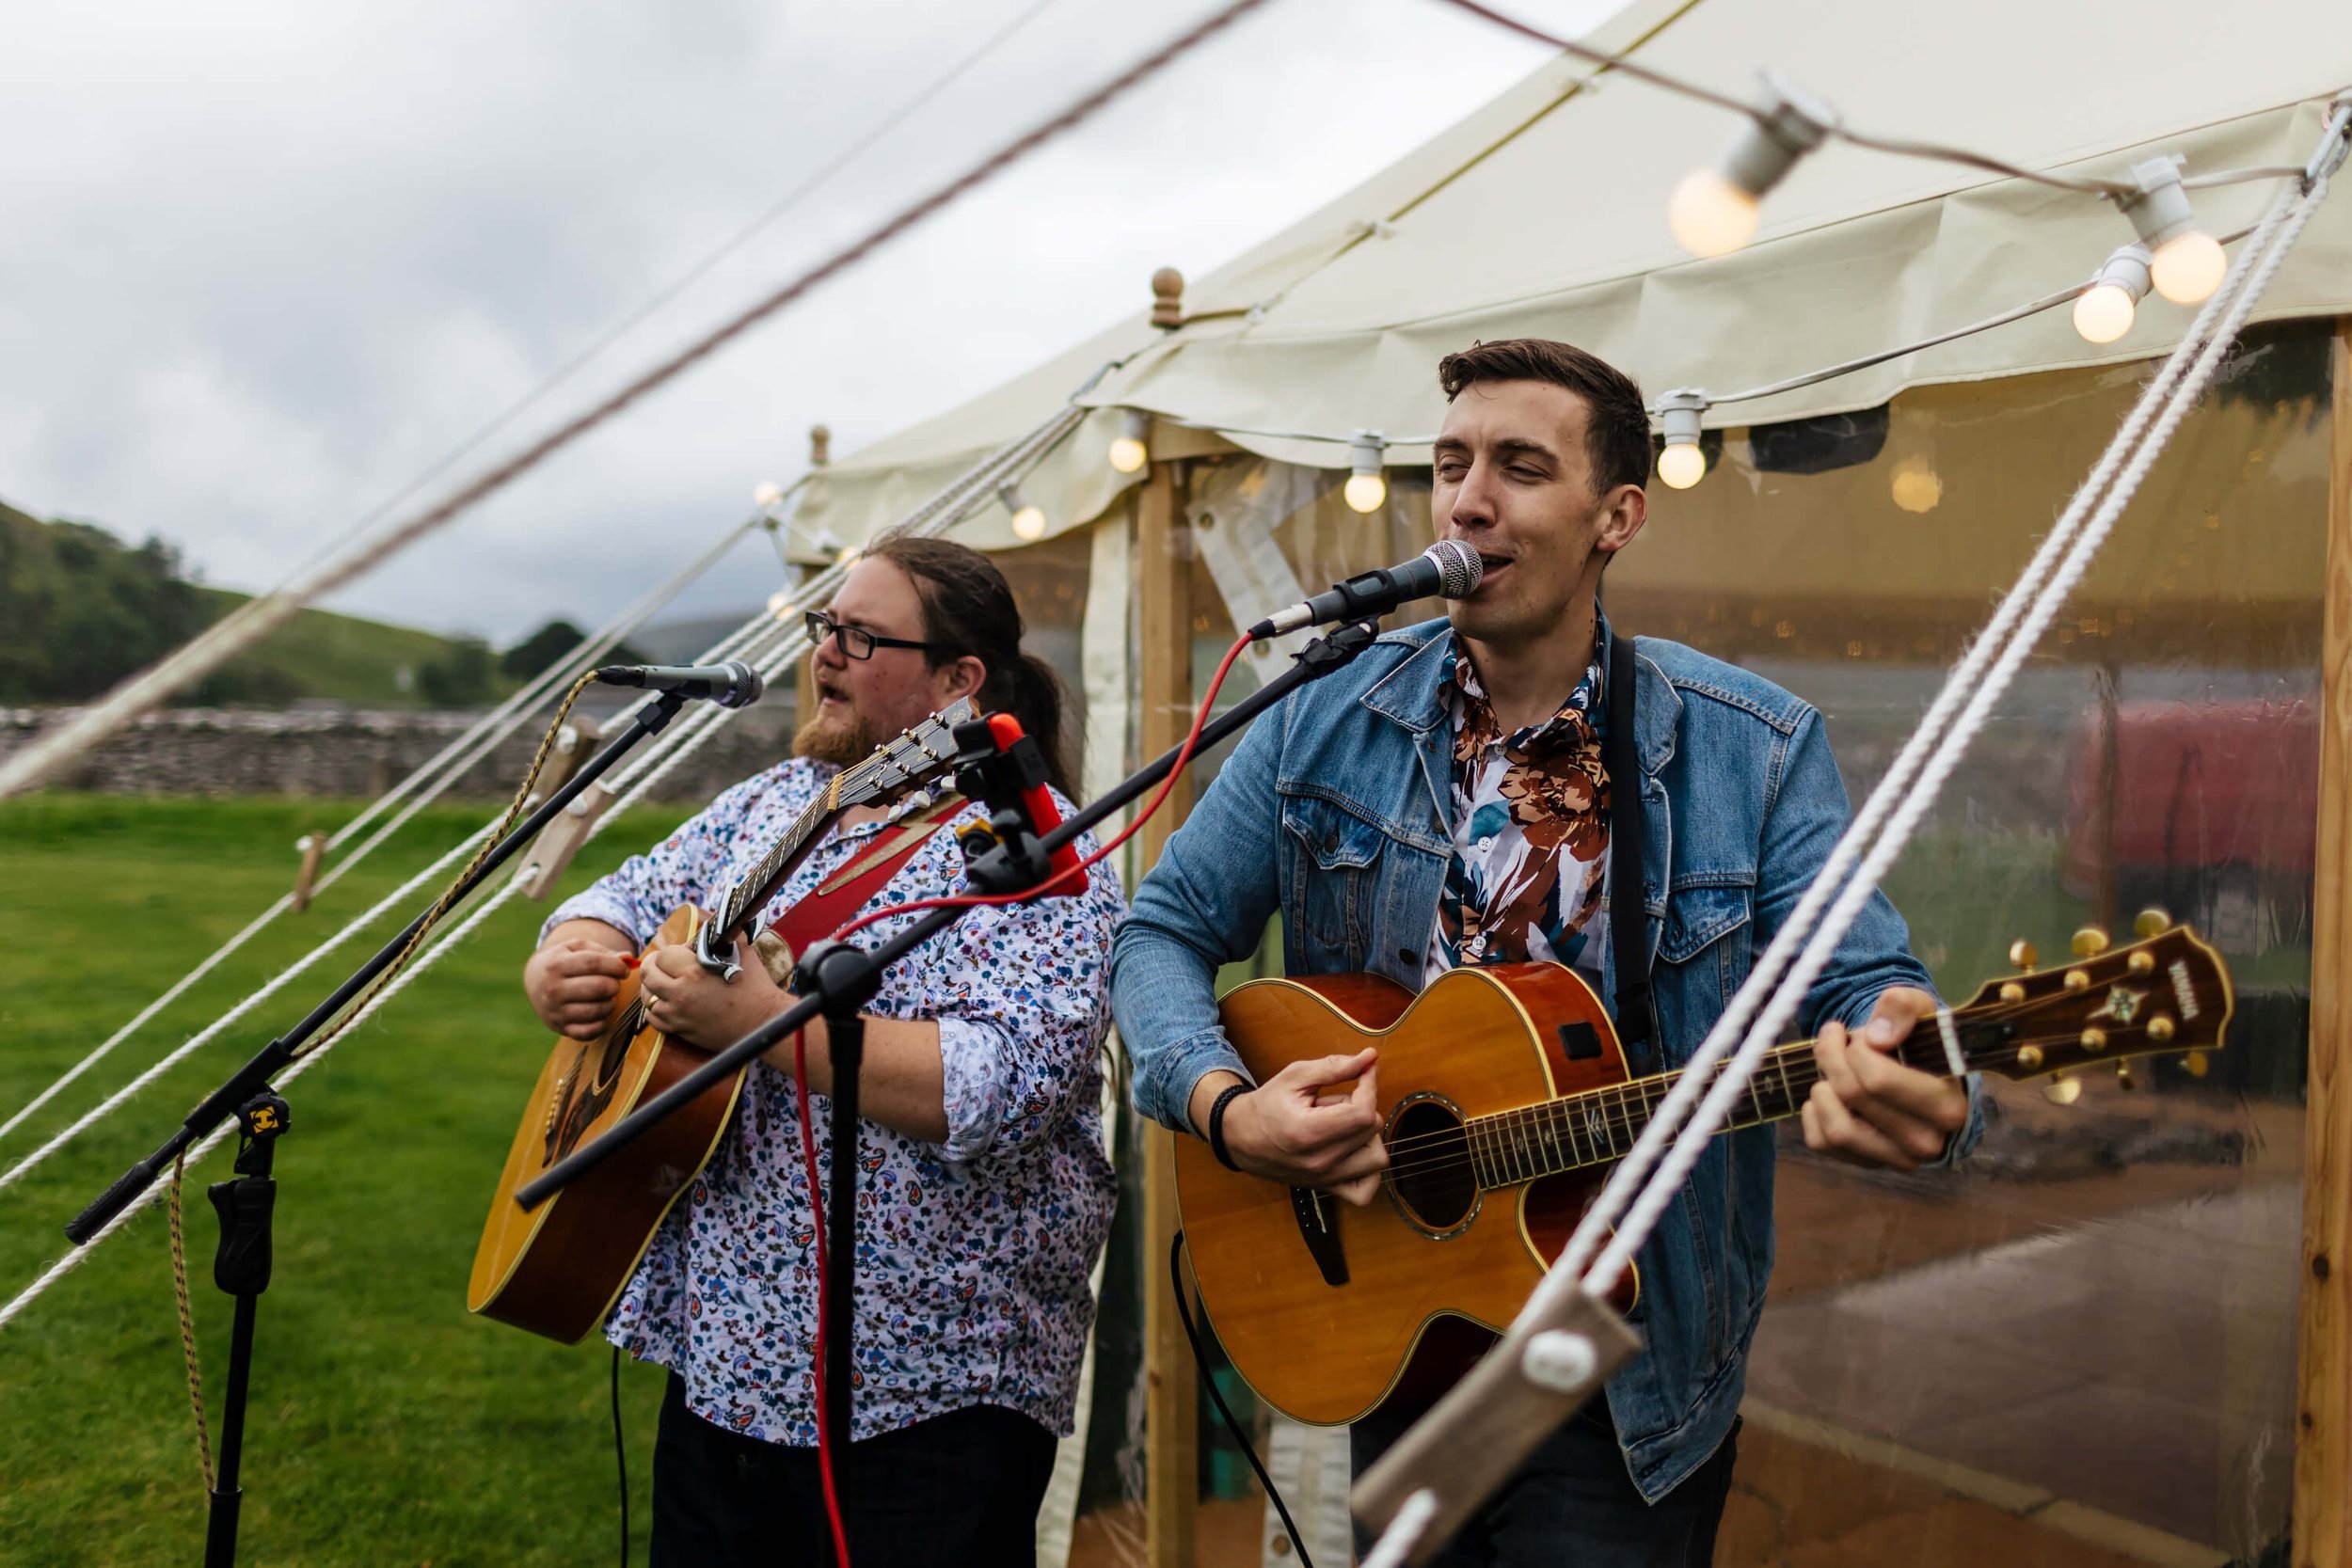 Guitarists and singers at a wedding outside the marquee